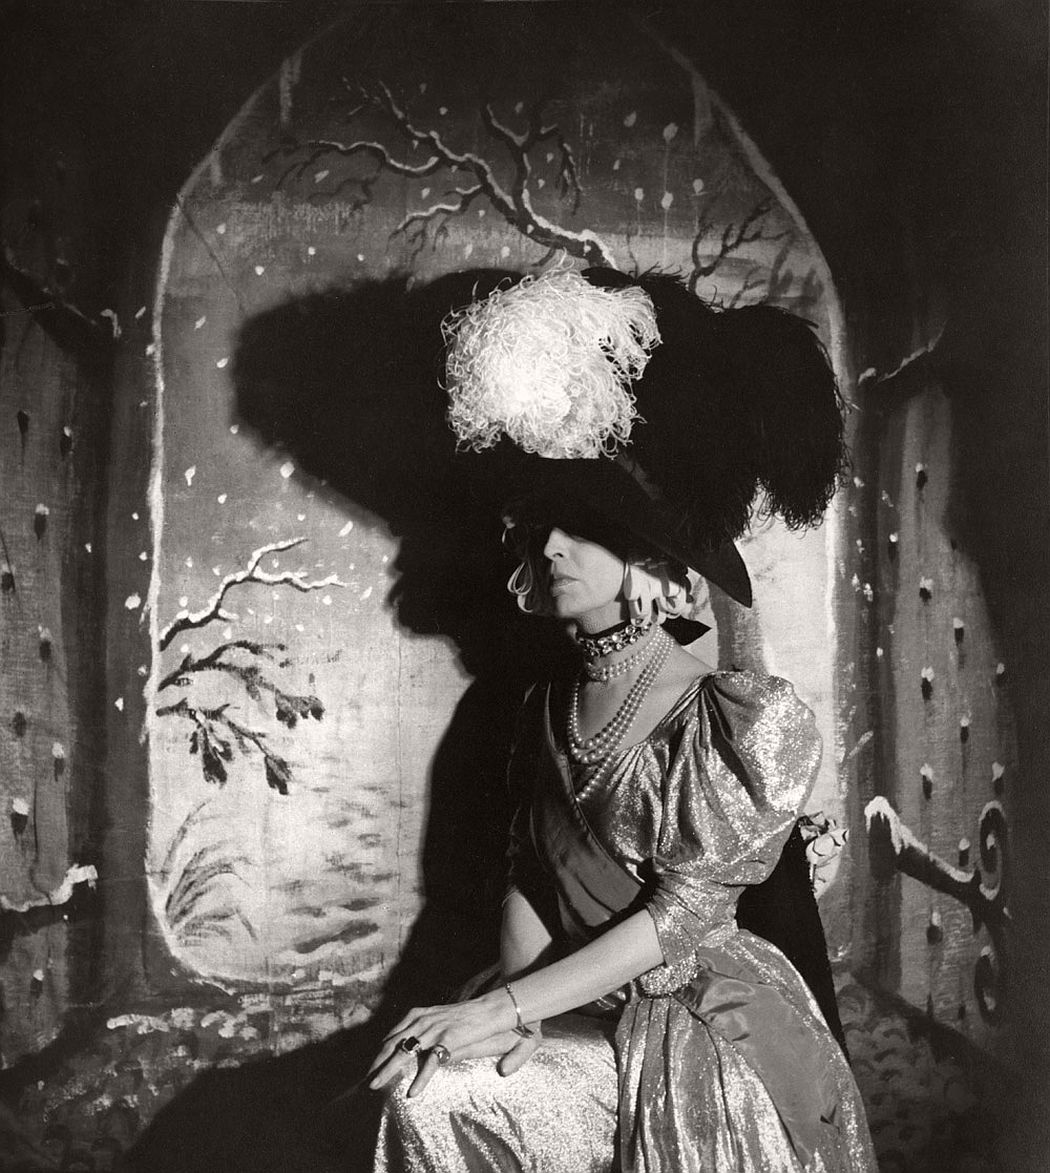 The Countess of Pembroke acting in Beaton’s musical “Heil Cinderella” 1939 © Cecil Beaton Archive, Sotheby’s